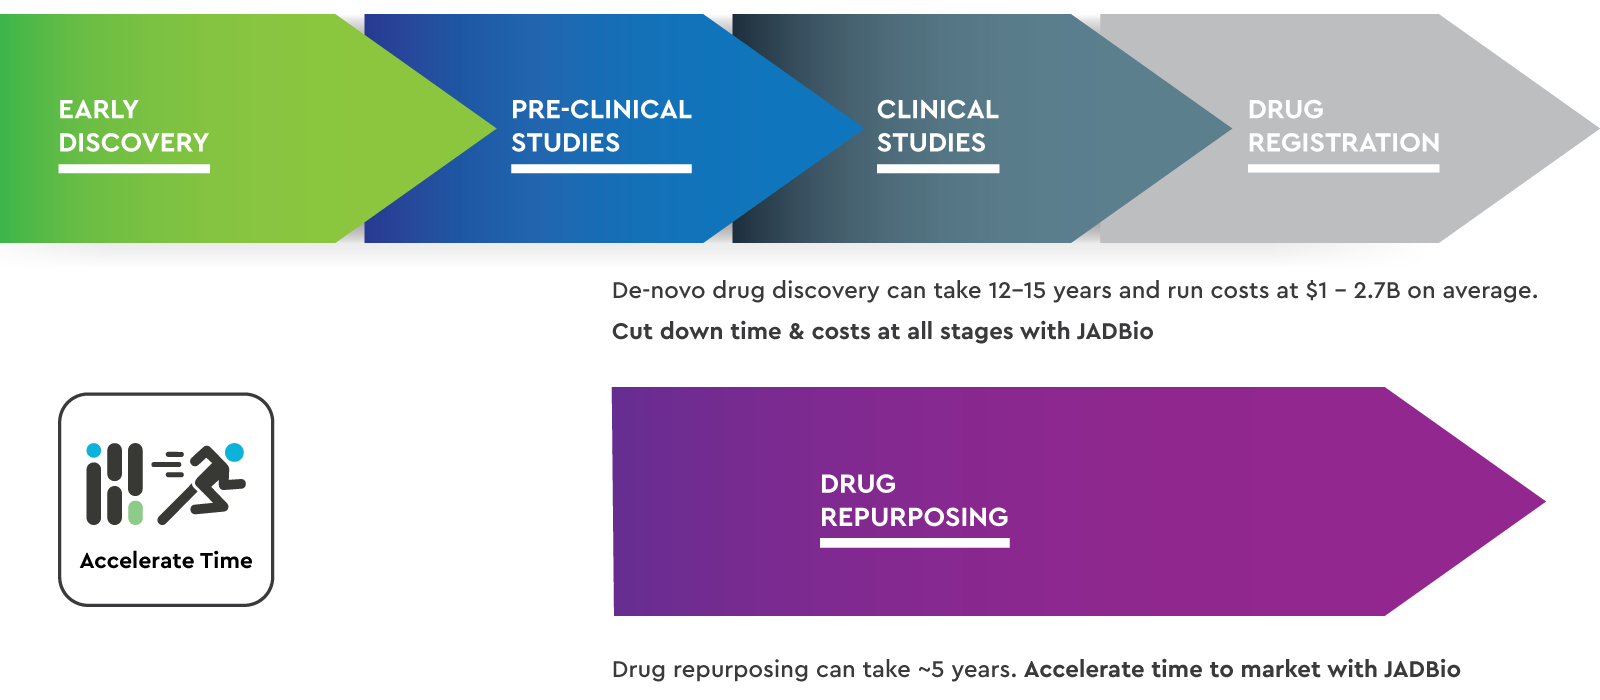 Disrupting Drug Discovery Times & Cost at All Stages